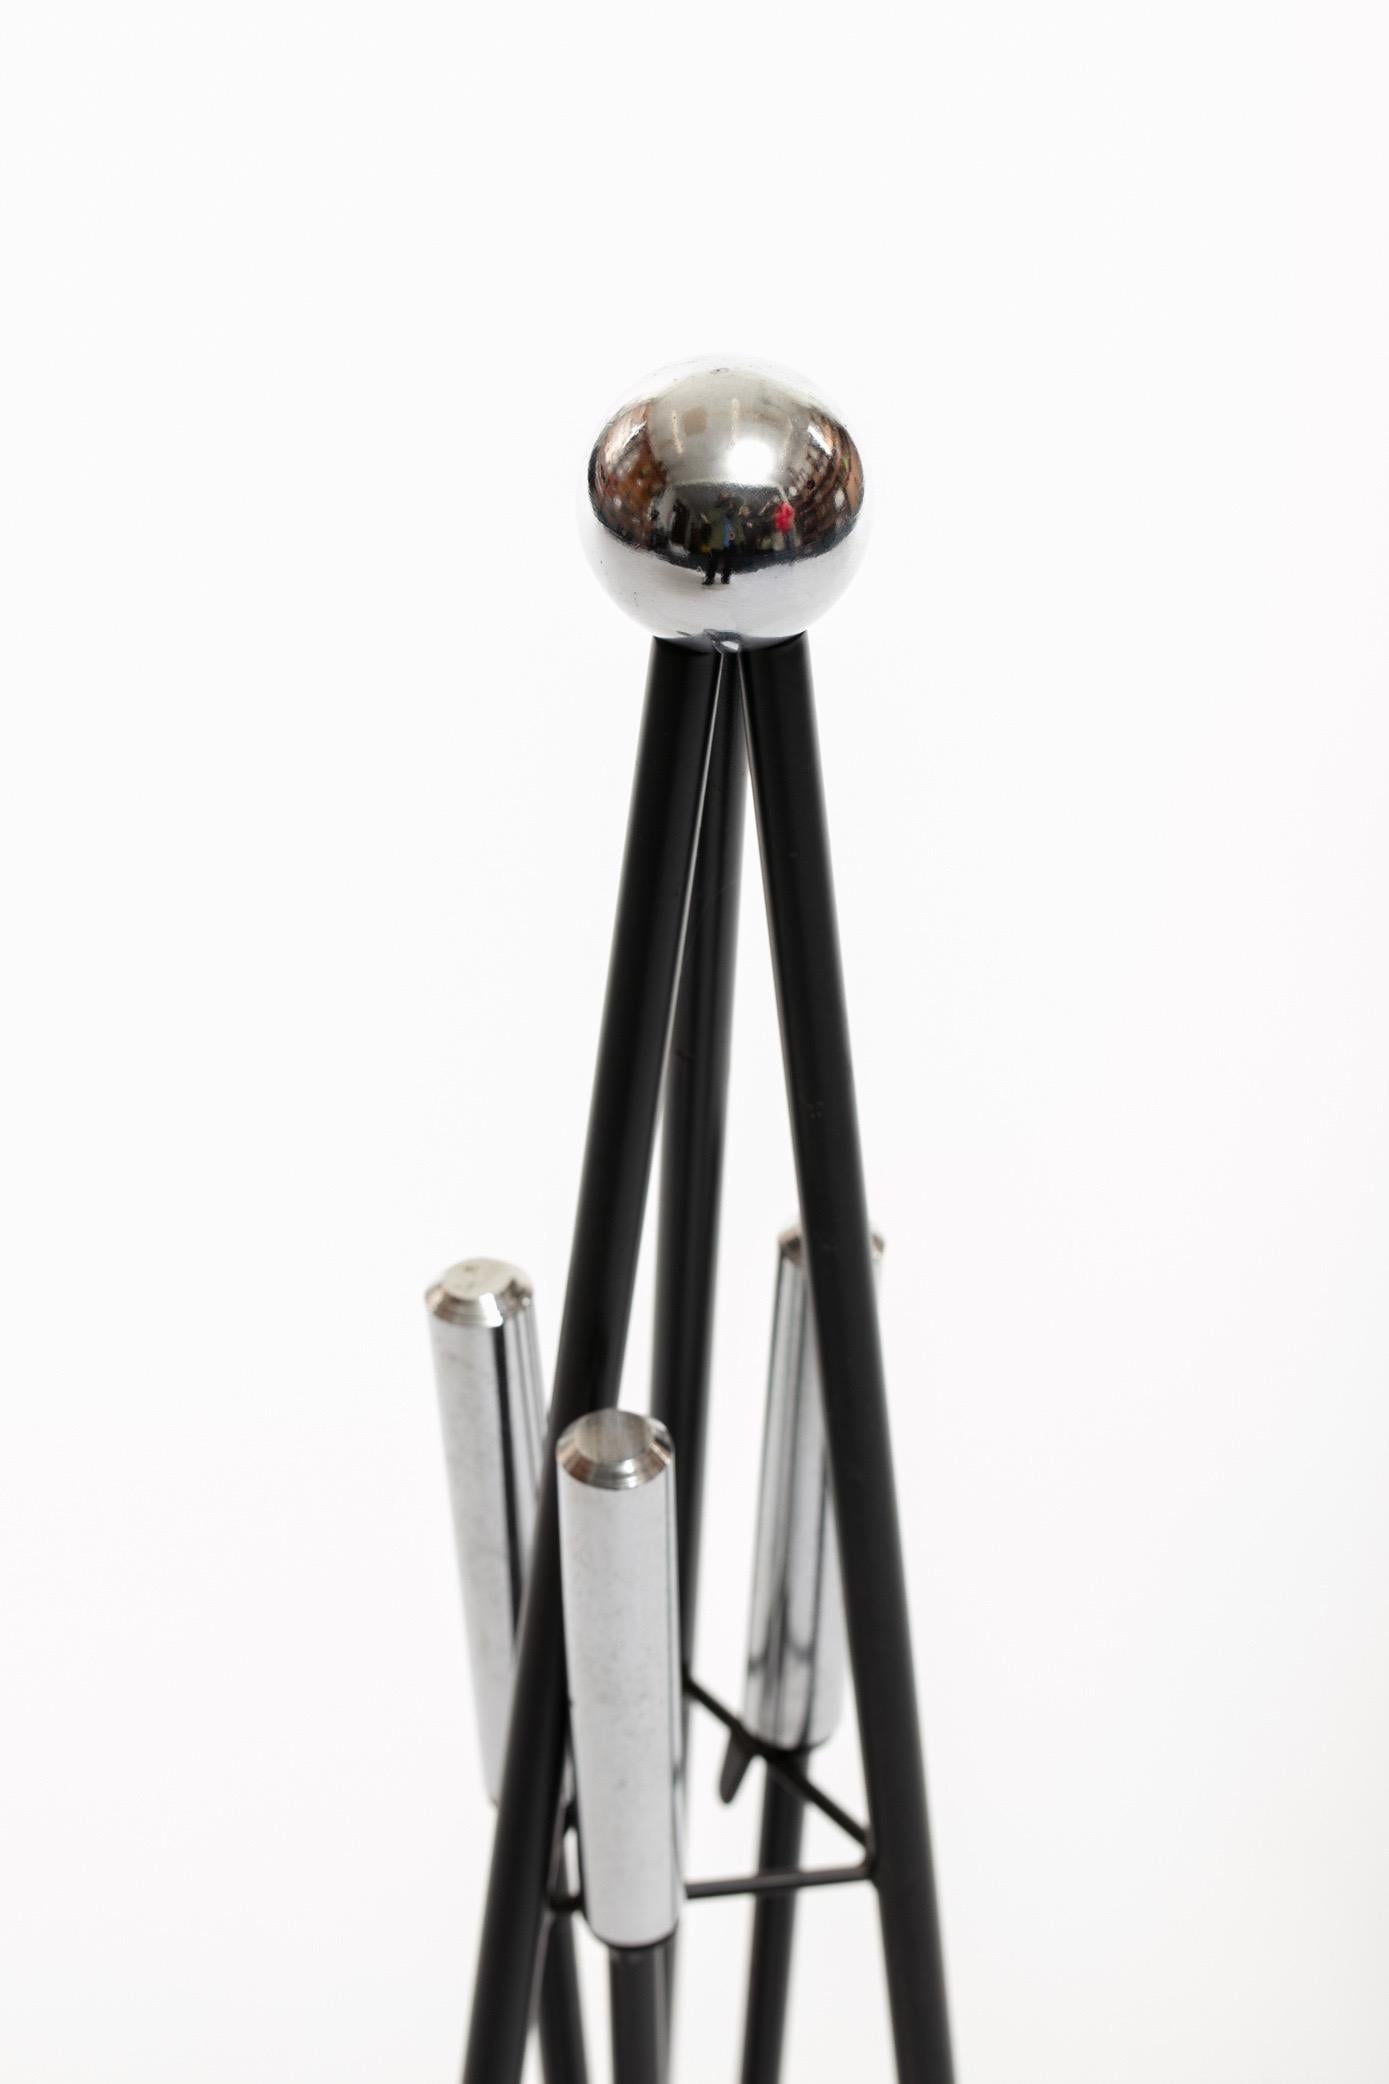 Set of modernist fireplace tools. An iron stand punctuated with nickel ball, nickel handled tools hang from the stand. This could be a nice sculptural addition you your fireplace. 

30” h x 9” dia 

Want to see more beautiful things? Scroll down